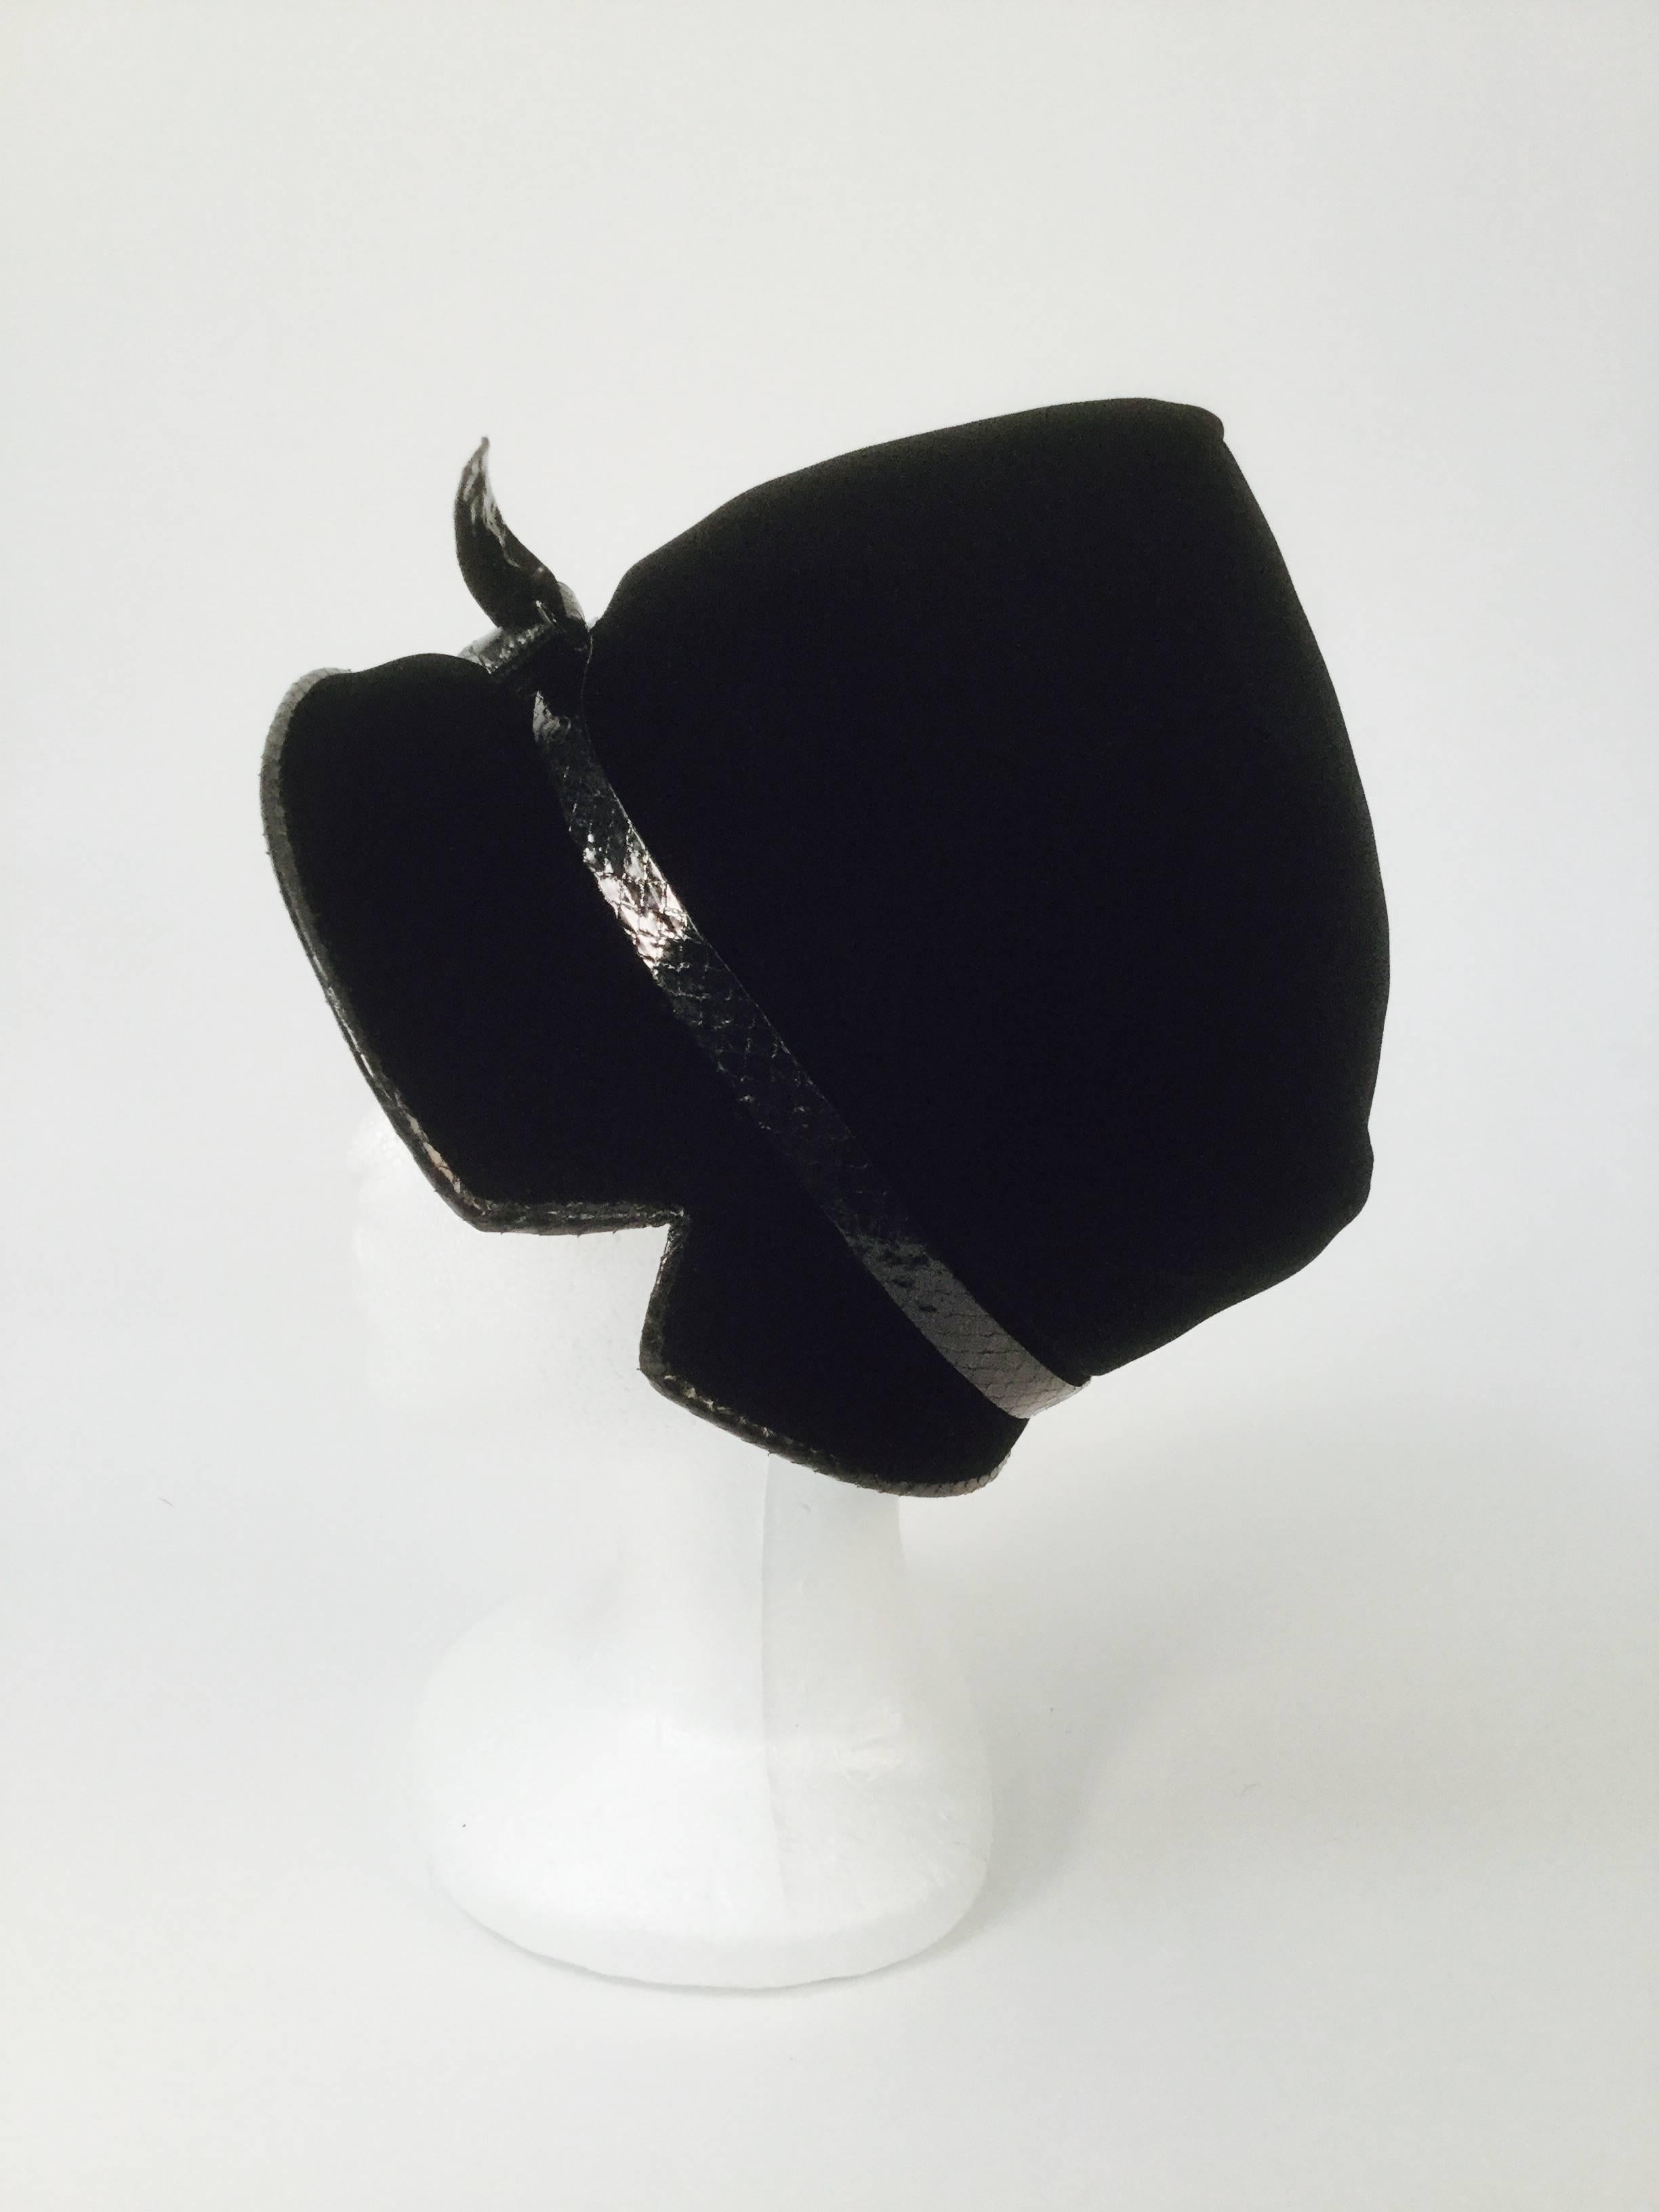 
Striking mod hat by Christian Dior for Mc Curdys of Rochester! This velvet cloche - bonnet hat has a flat top, and a wide front brim that tapers towards the back. The tapering brim features two notches -one on each side- just above the temple. The